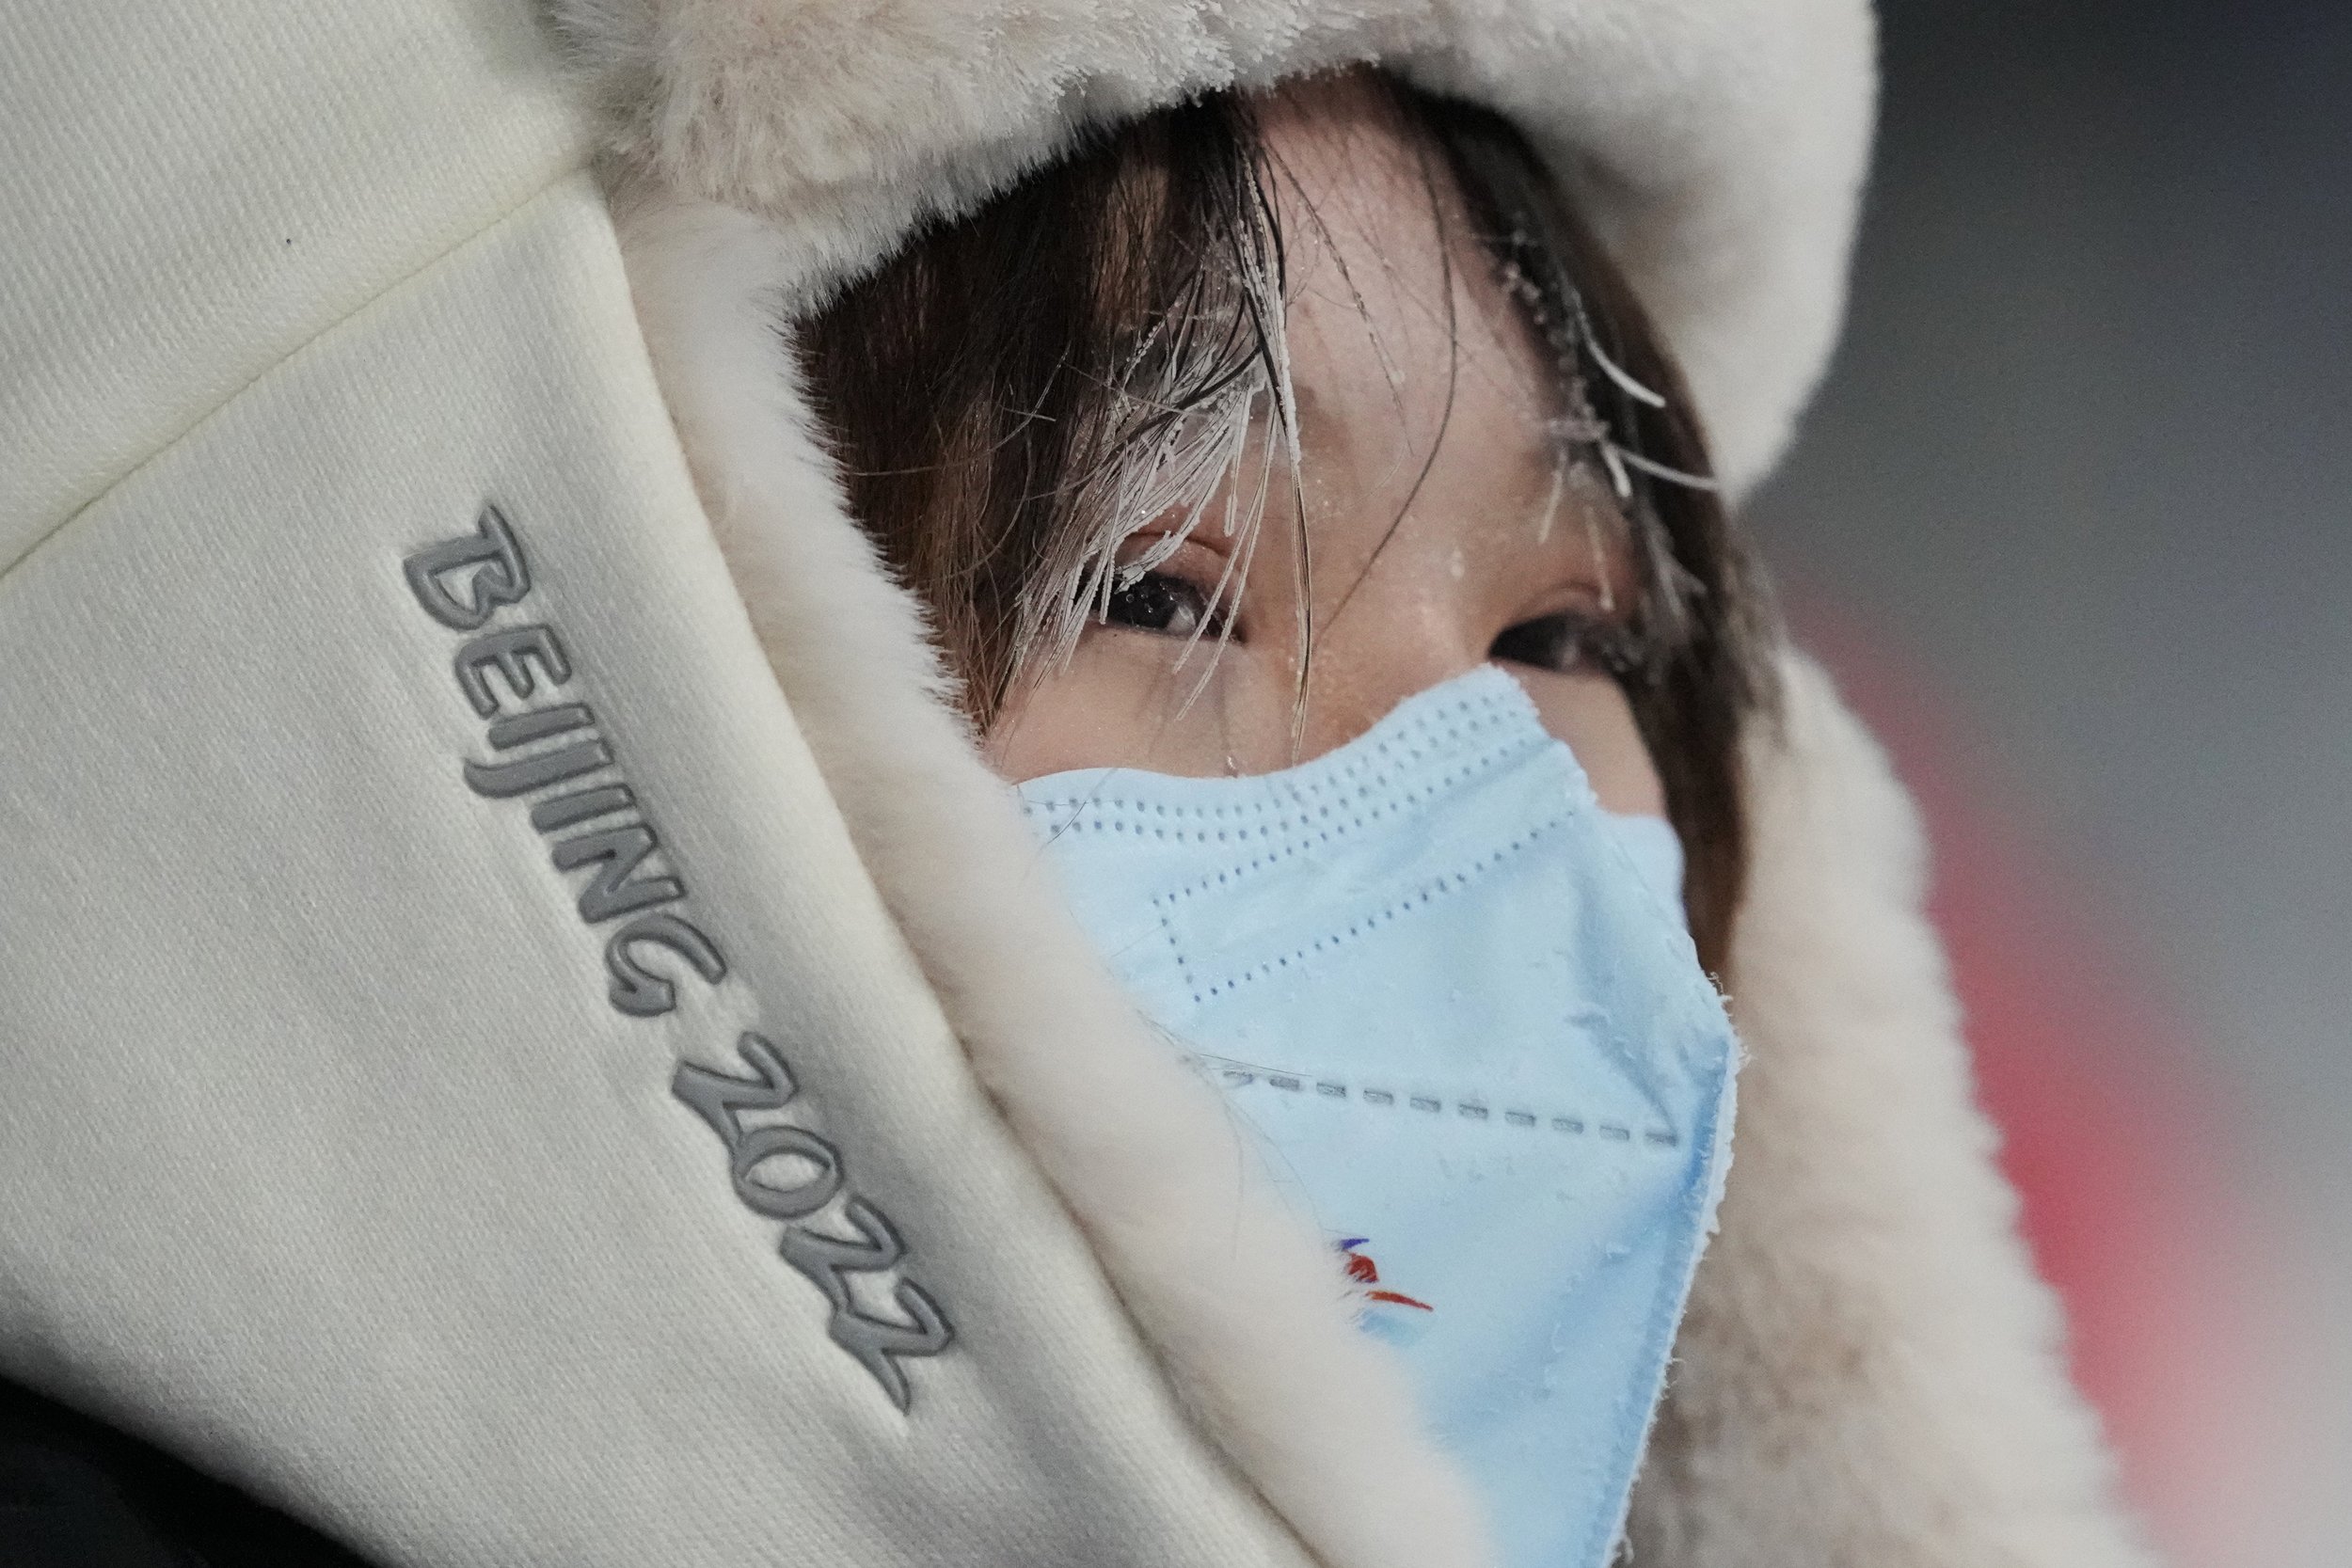  Icicles hang down on the hair of a volunteer during the men's aerials qualification at the 2022 Winter Olympics, Tuesday, Feb. 15, 2022, in Zhangjiakou, China. (AP Photo/Lee Jin-man) 